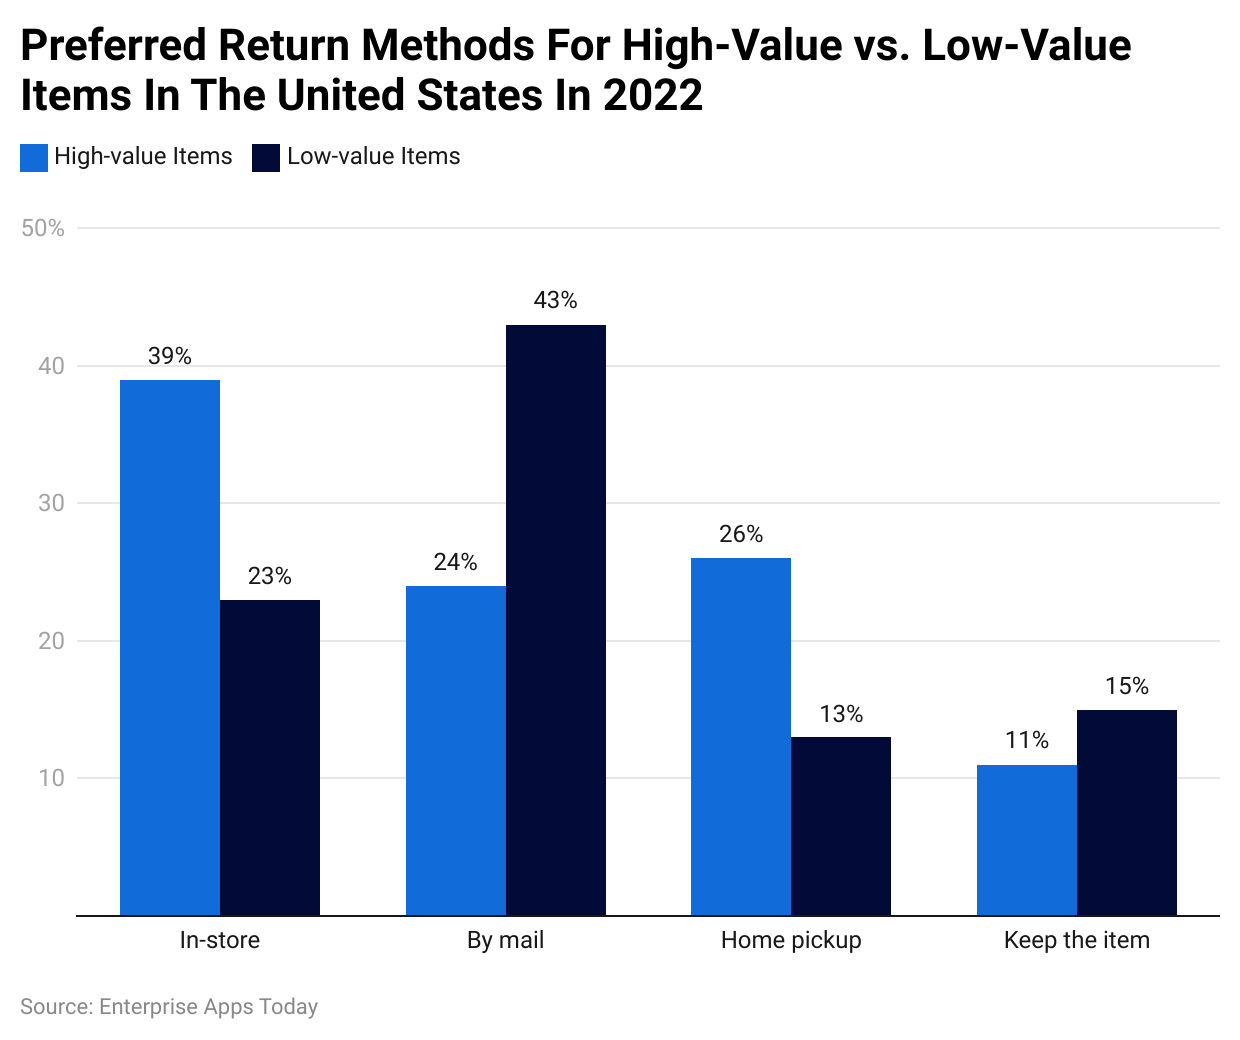 Preferred return methods for high-value vs. low-value items in the United States in 2022